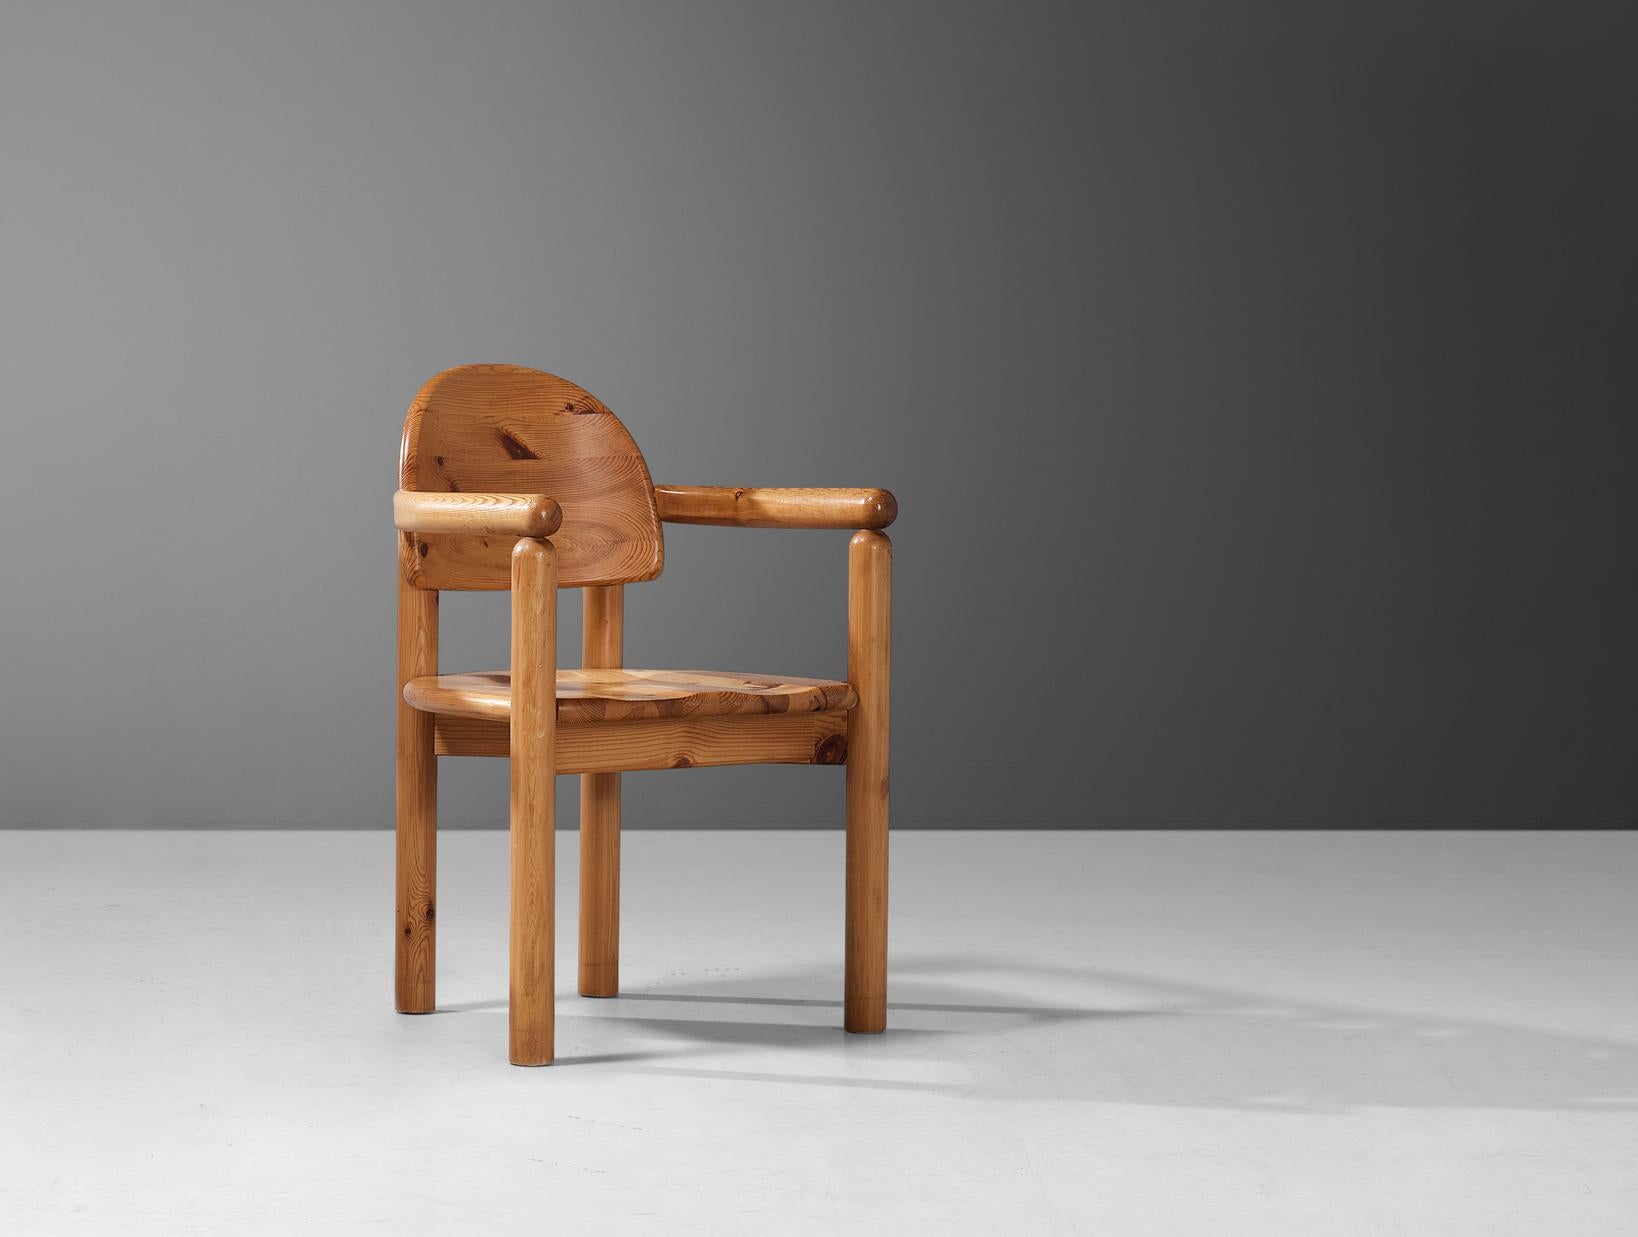 Rainer Daumiller for Hirtshals Savvaerk, armchair, pine, Denmark, 1970s.
 
This armchair by Danish designer Rainer Daumiller shows multiple beautiful organic features. The vivid grain of the warm pine wood contributes to the natural expressiveness